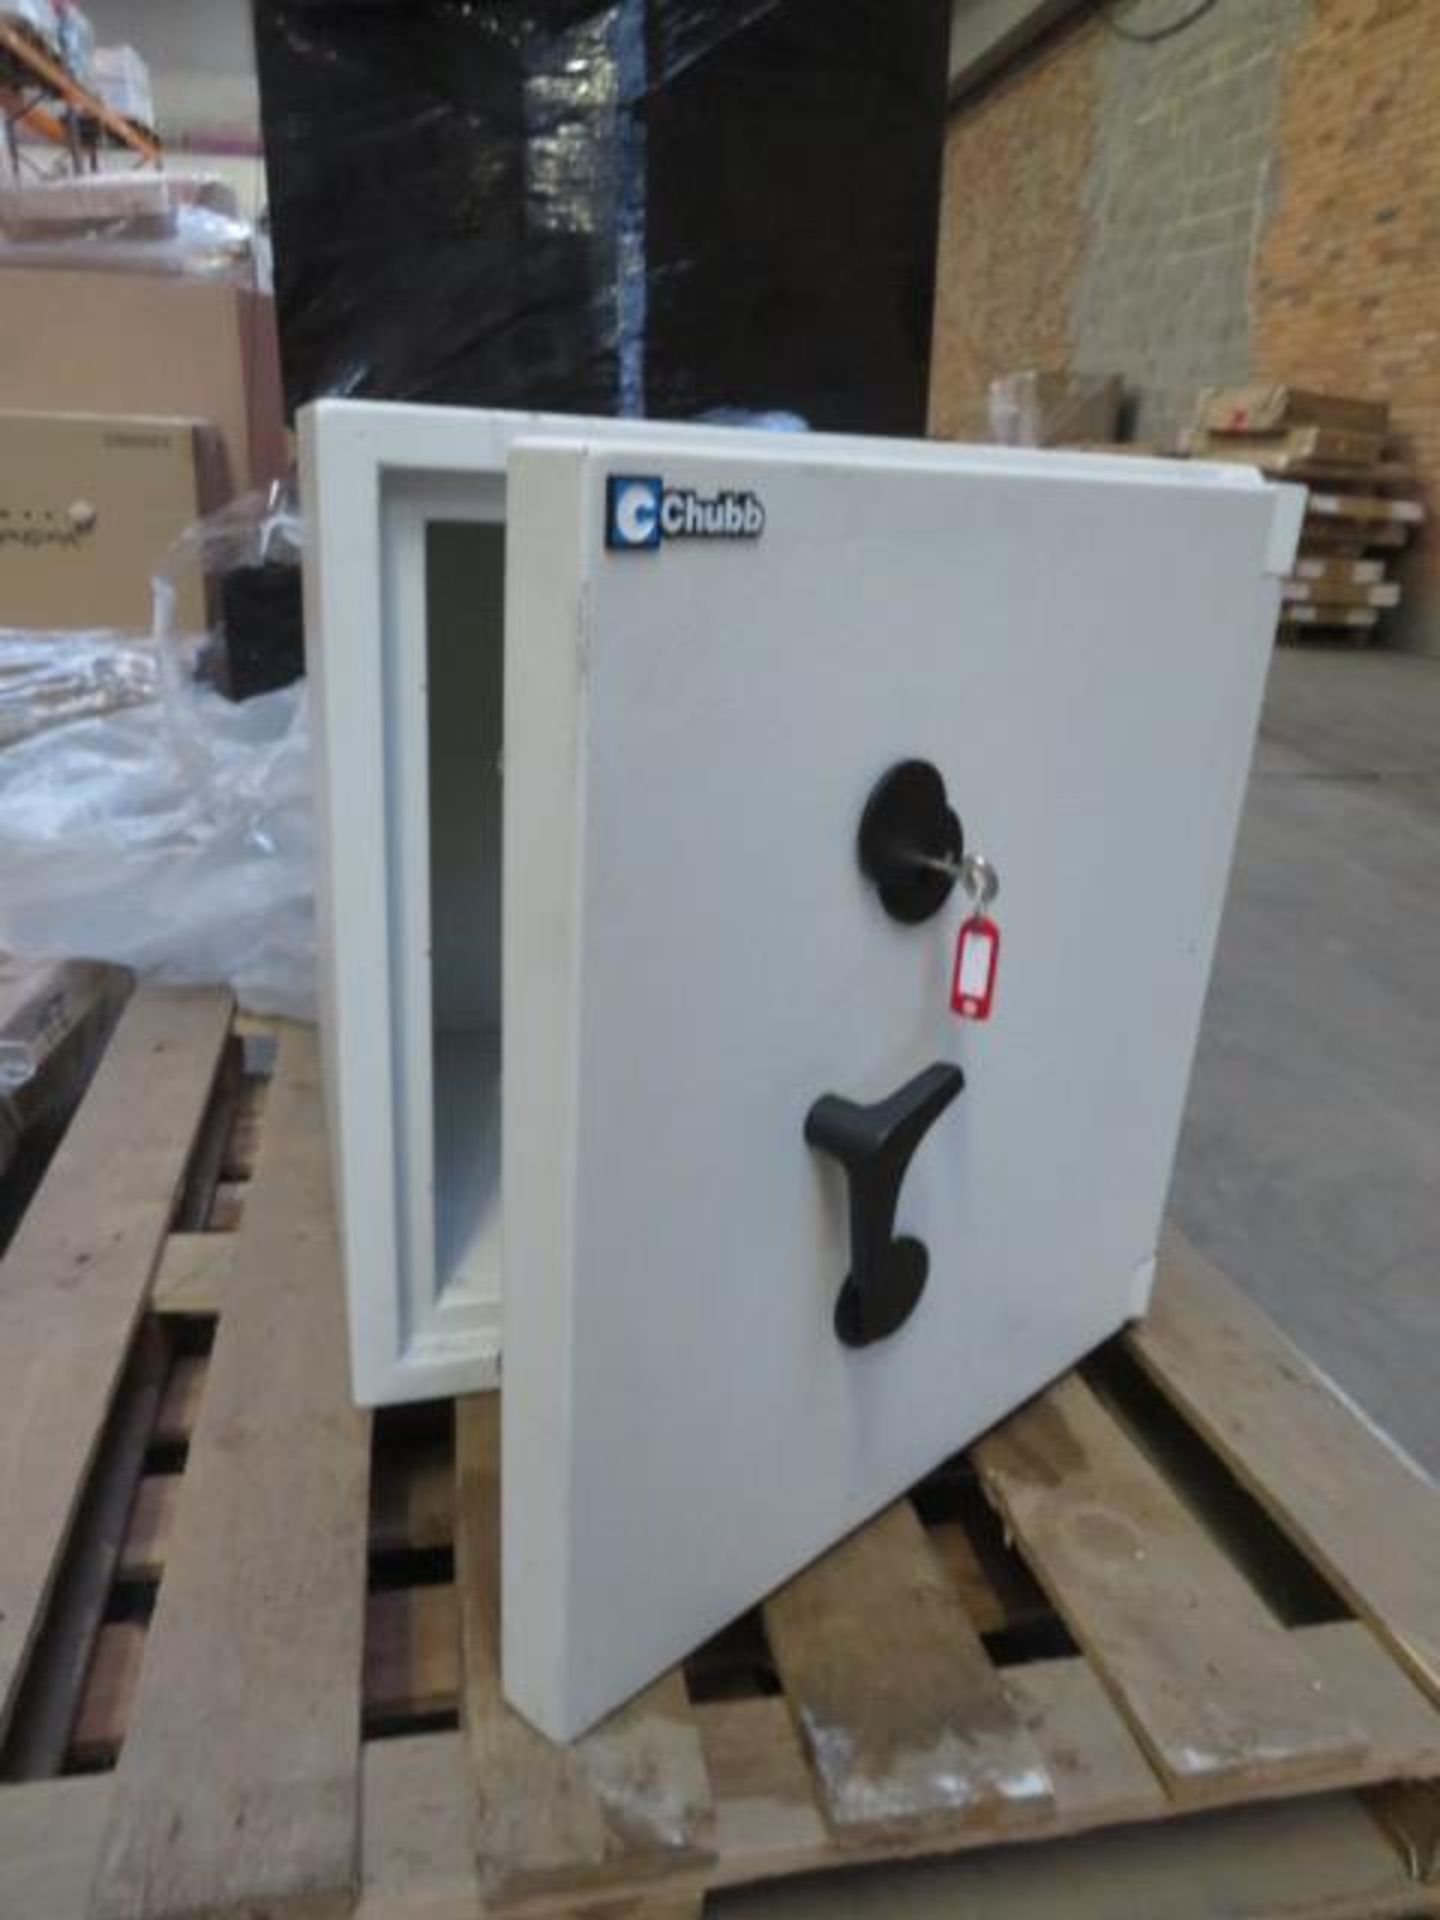 Chubb High Quality Safe with Key. Type EurfoSafe. We have a forklift on site to assist with loa...